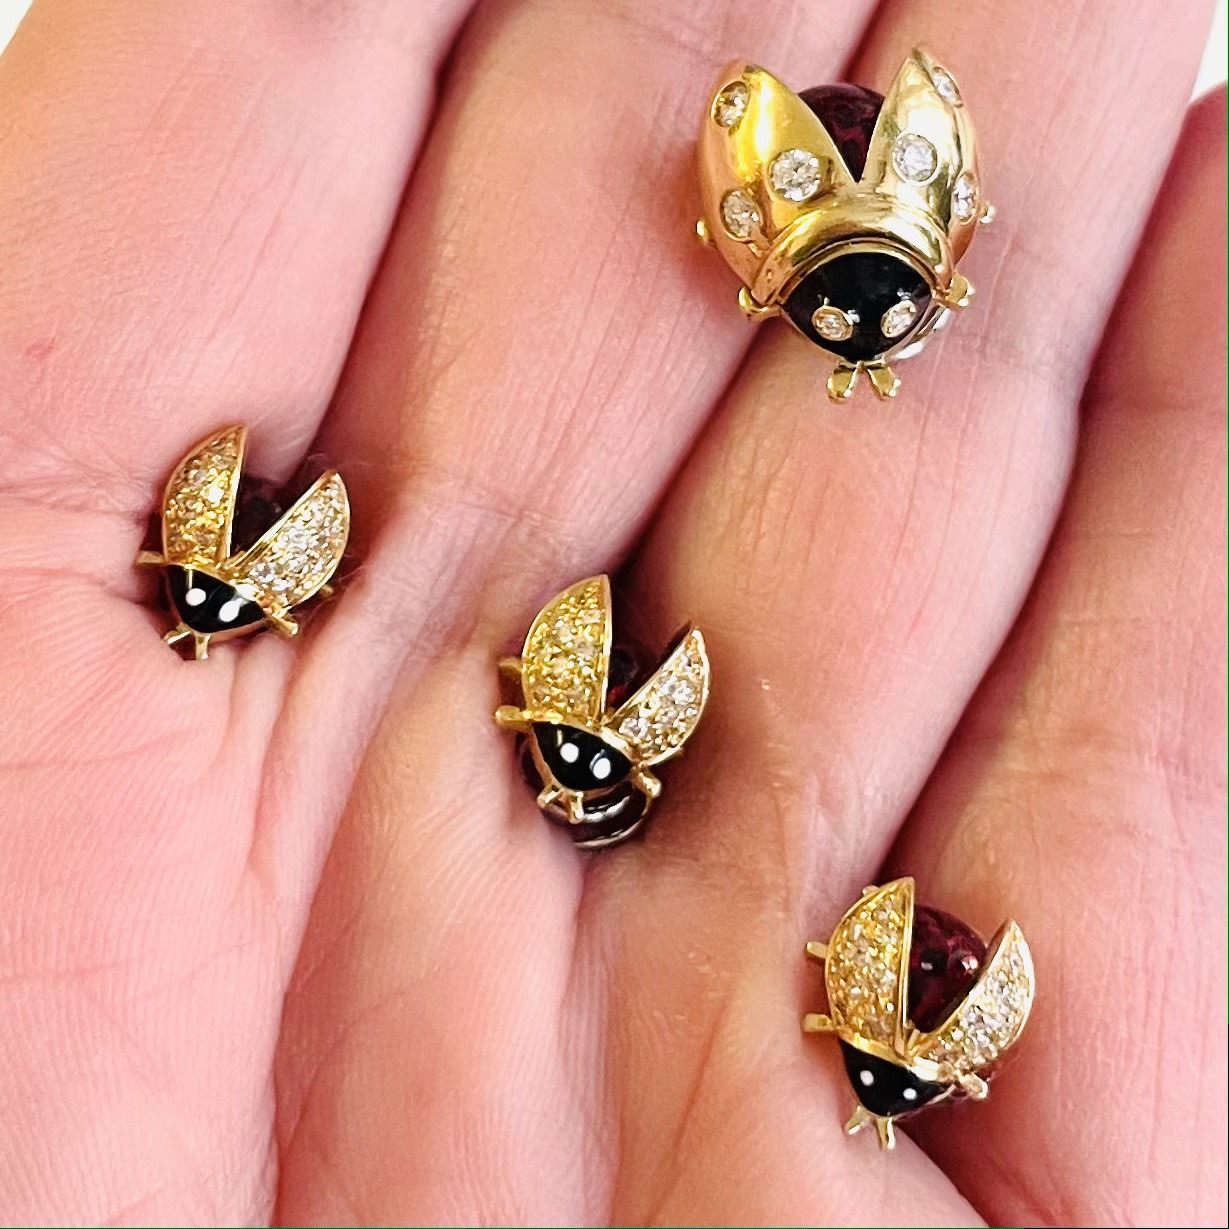 Meister Post-1980s 18KT Yellow Gold Enamel & Diamond Ladybug Brooches in hand